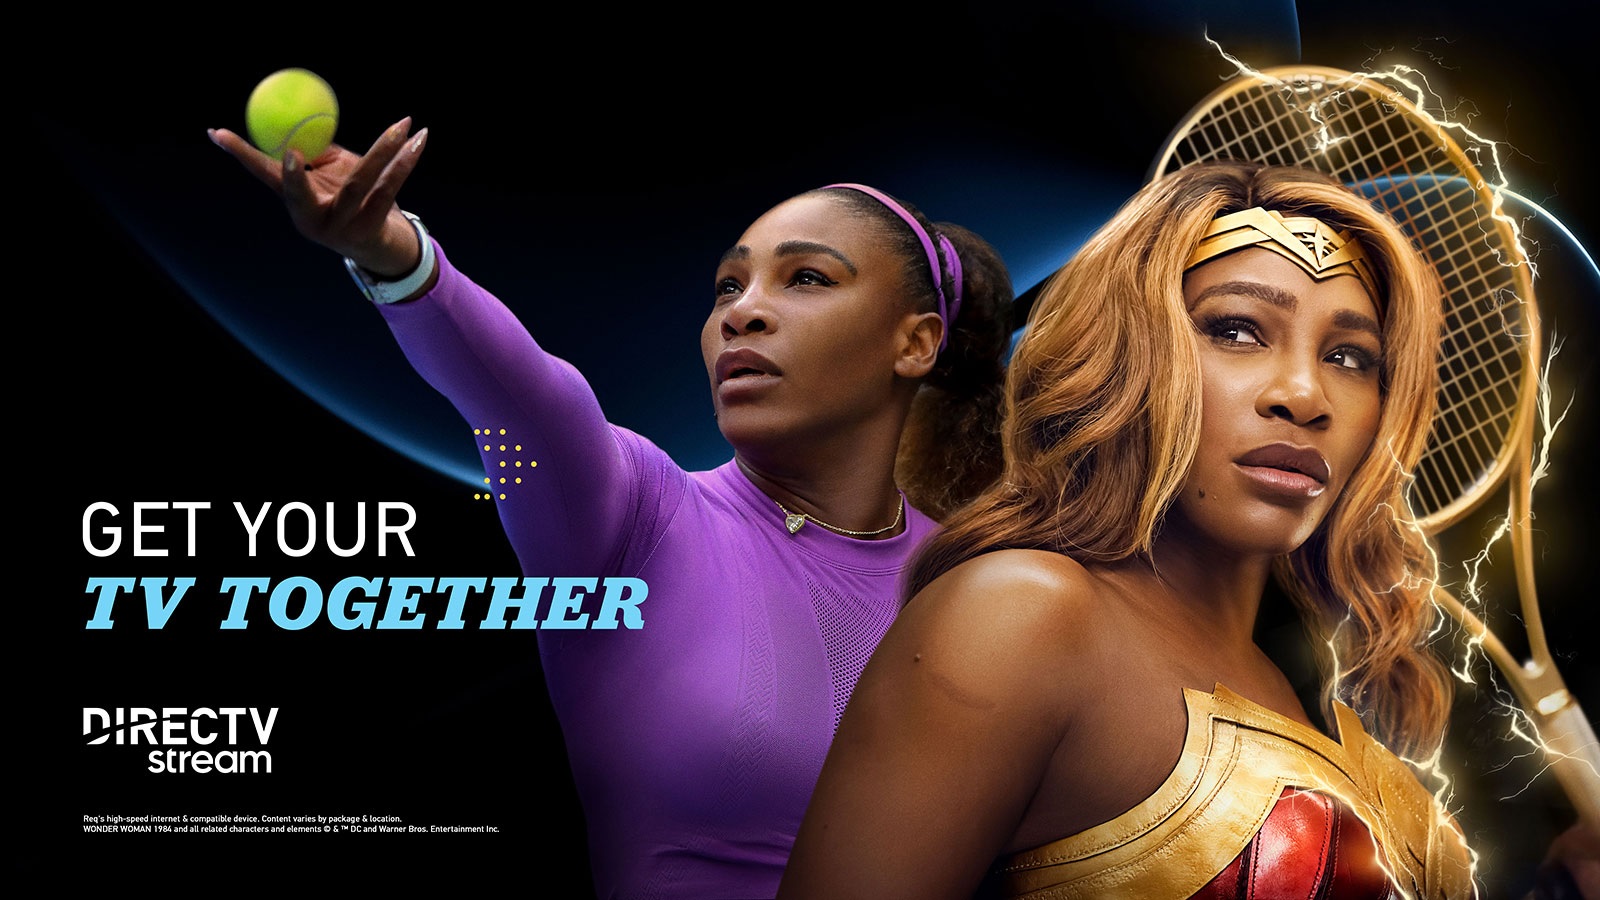 Ad Of The Day Serena Williams Saves The Day As Wonder Woman In Dramatic DirecTV Spot The Drum